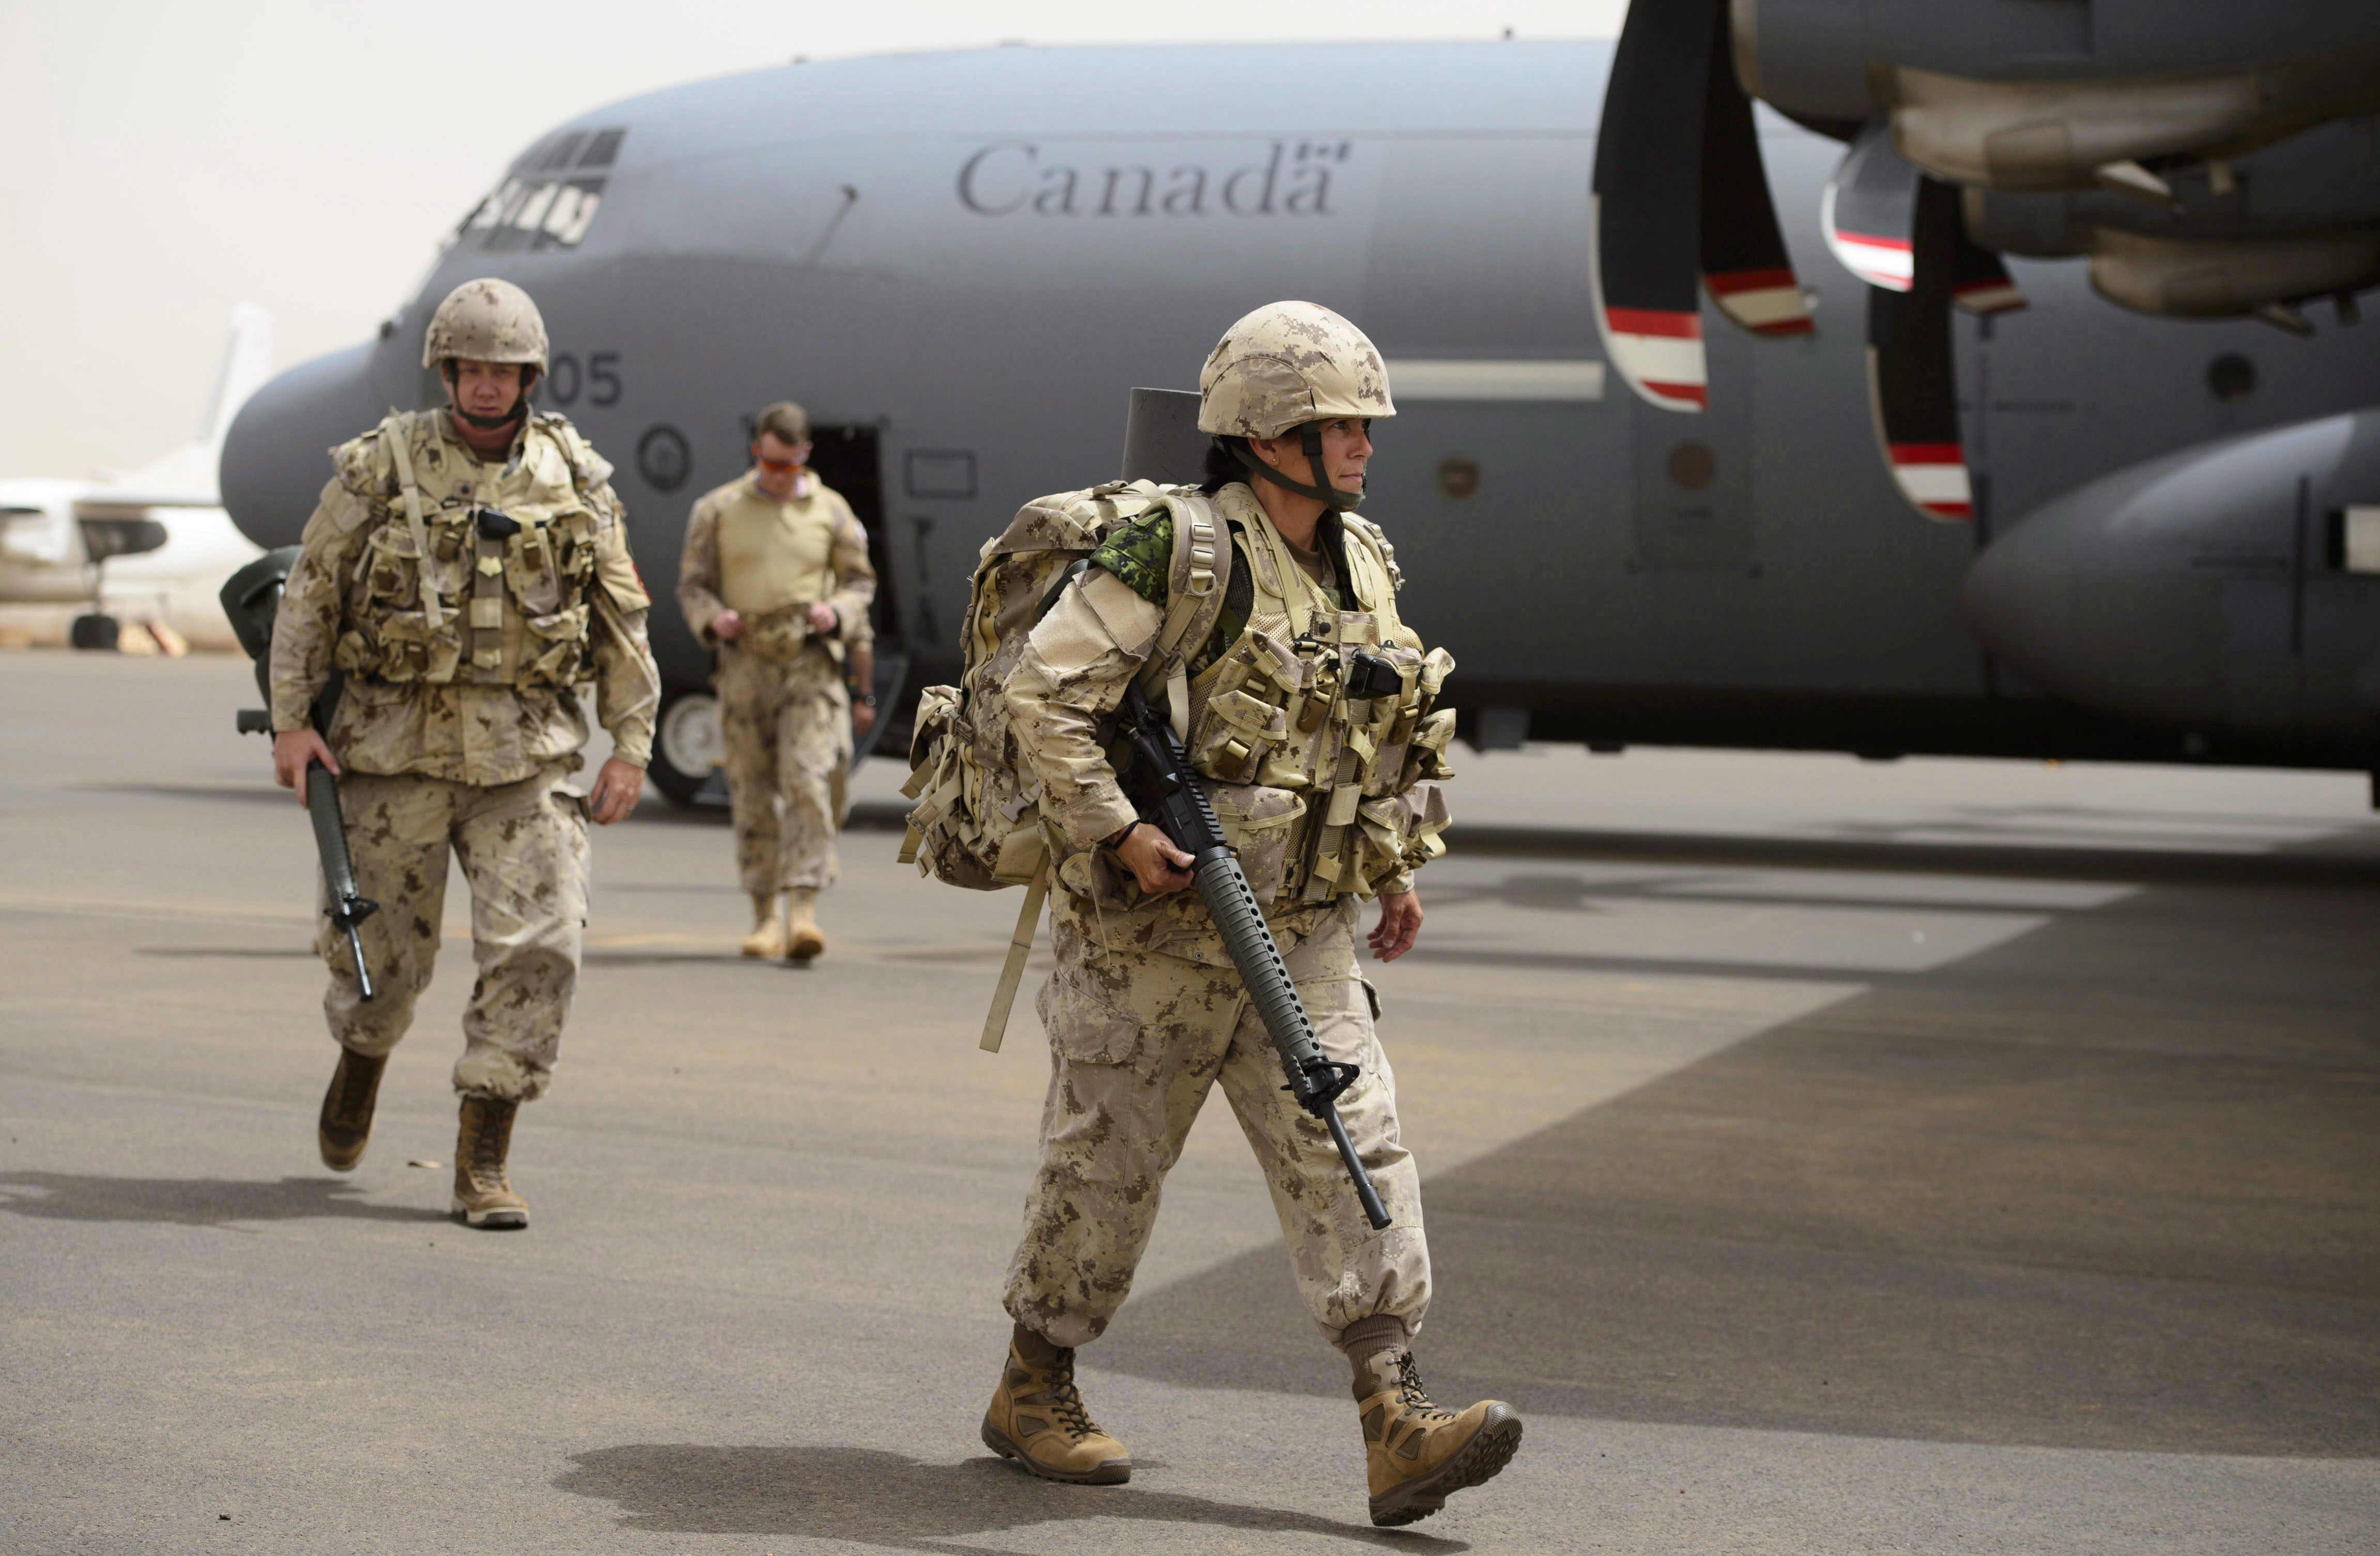 China in Focus (Dec. 11): Canada Under Fire for Training Chinese Troops